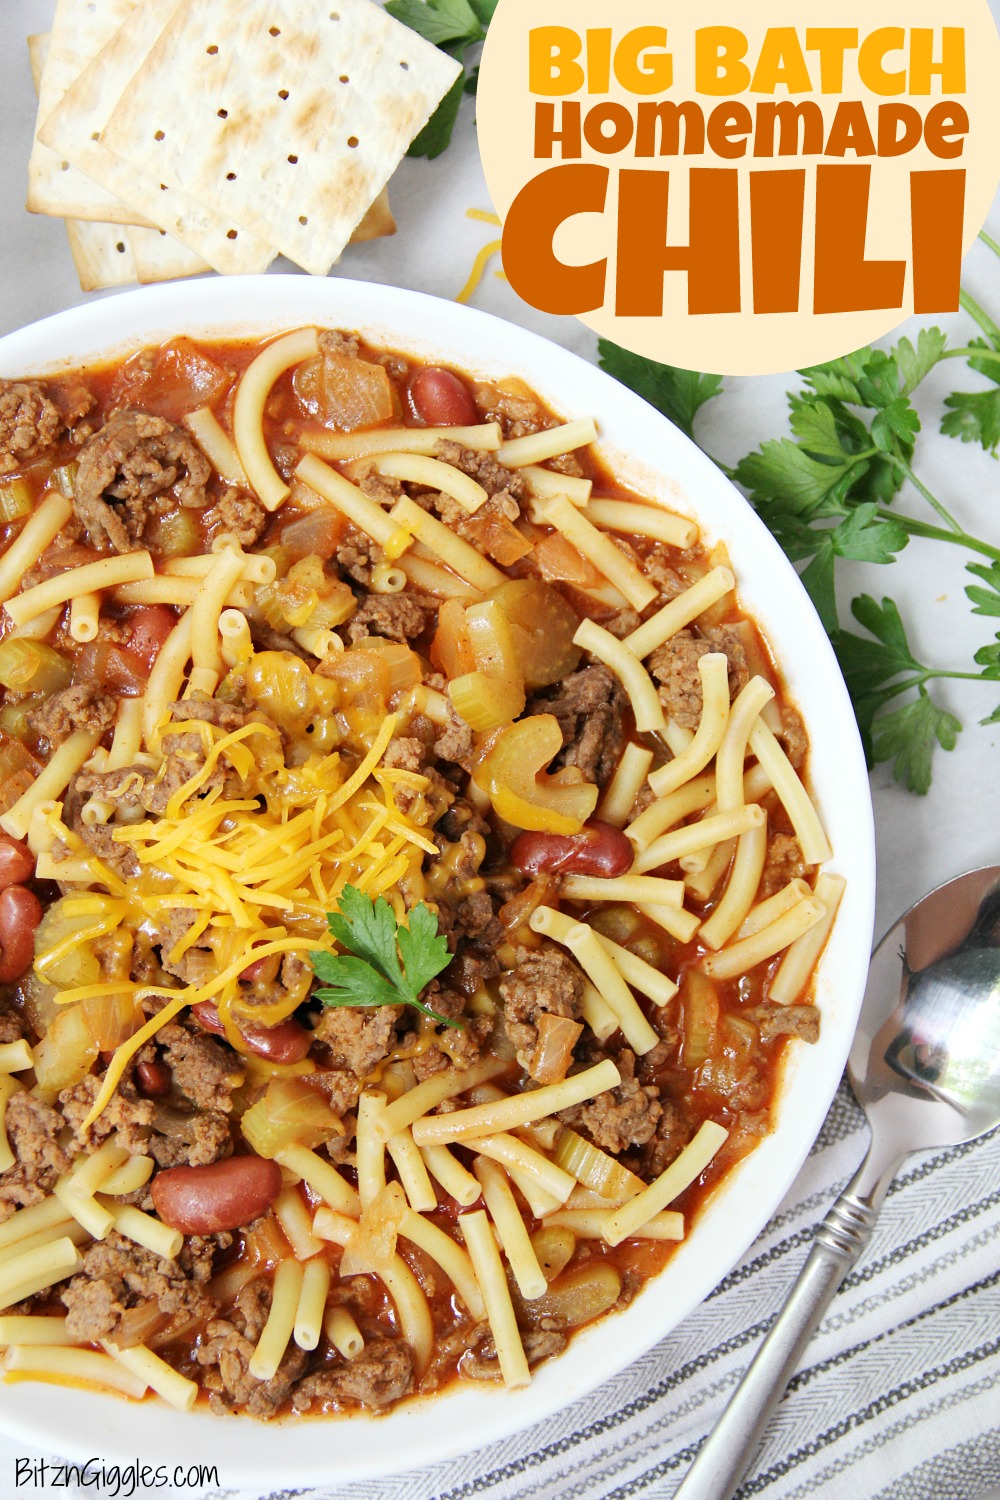 Big Batch Homemade Chili - A flavorful, yet mild chili, perfect for parties and gatherings. This chili is a family favorite and serves a crowd! 